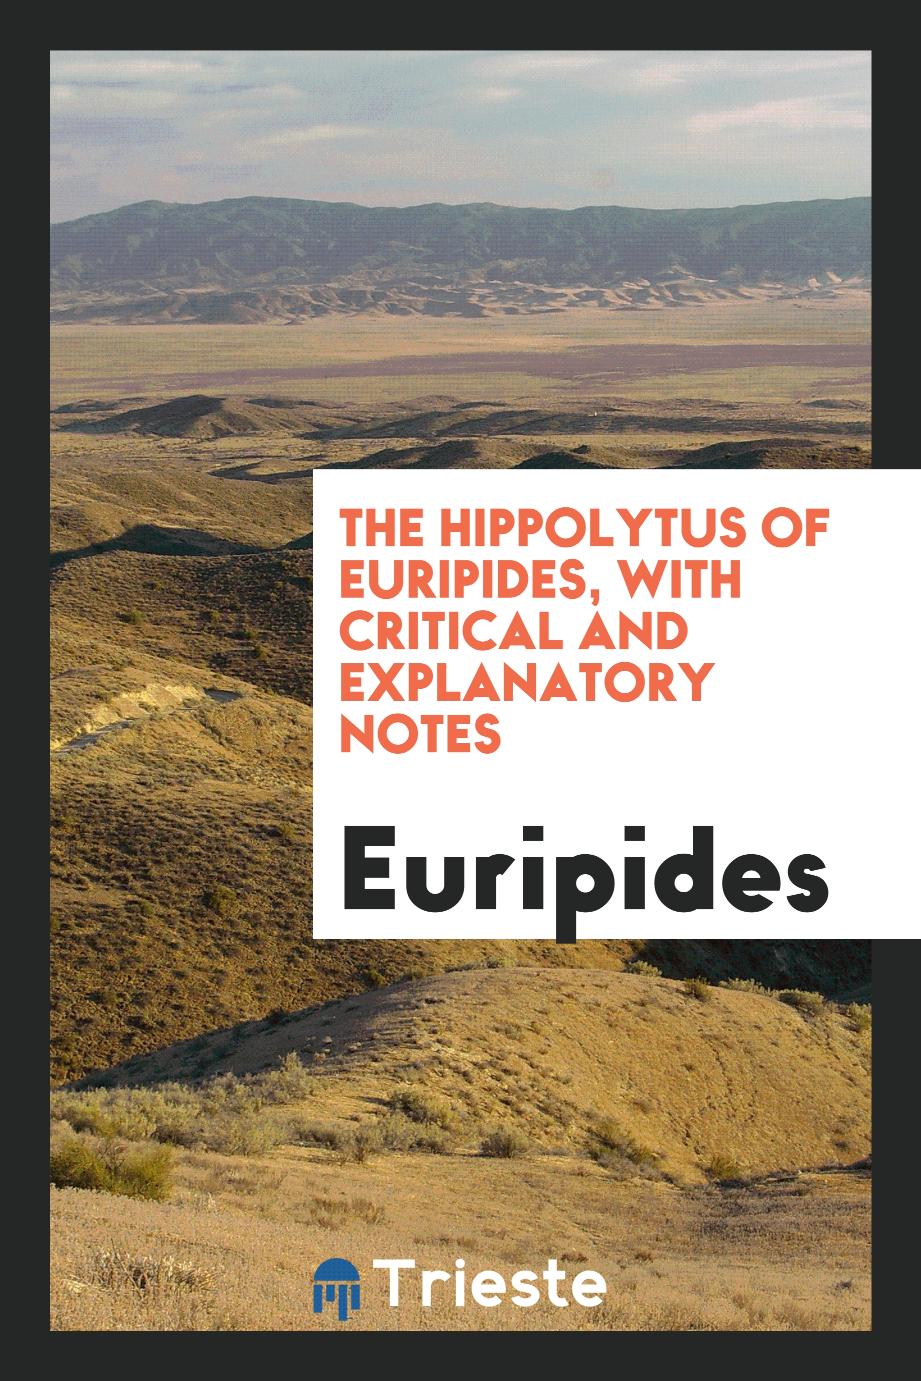 The Hippolytus of Euripides, with critical and explanatory notes